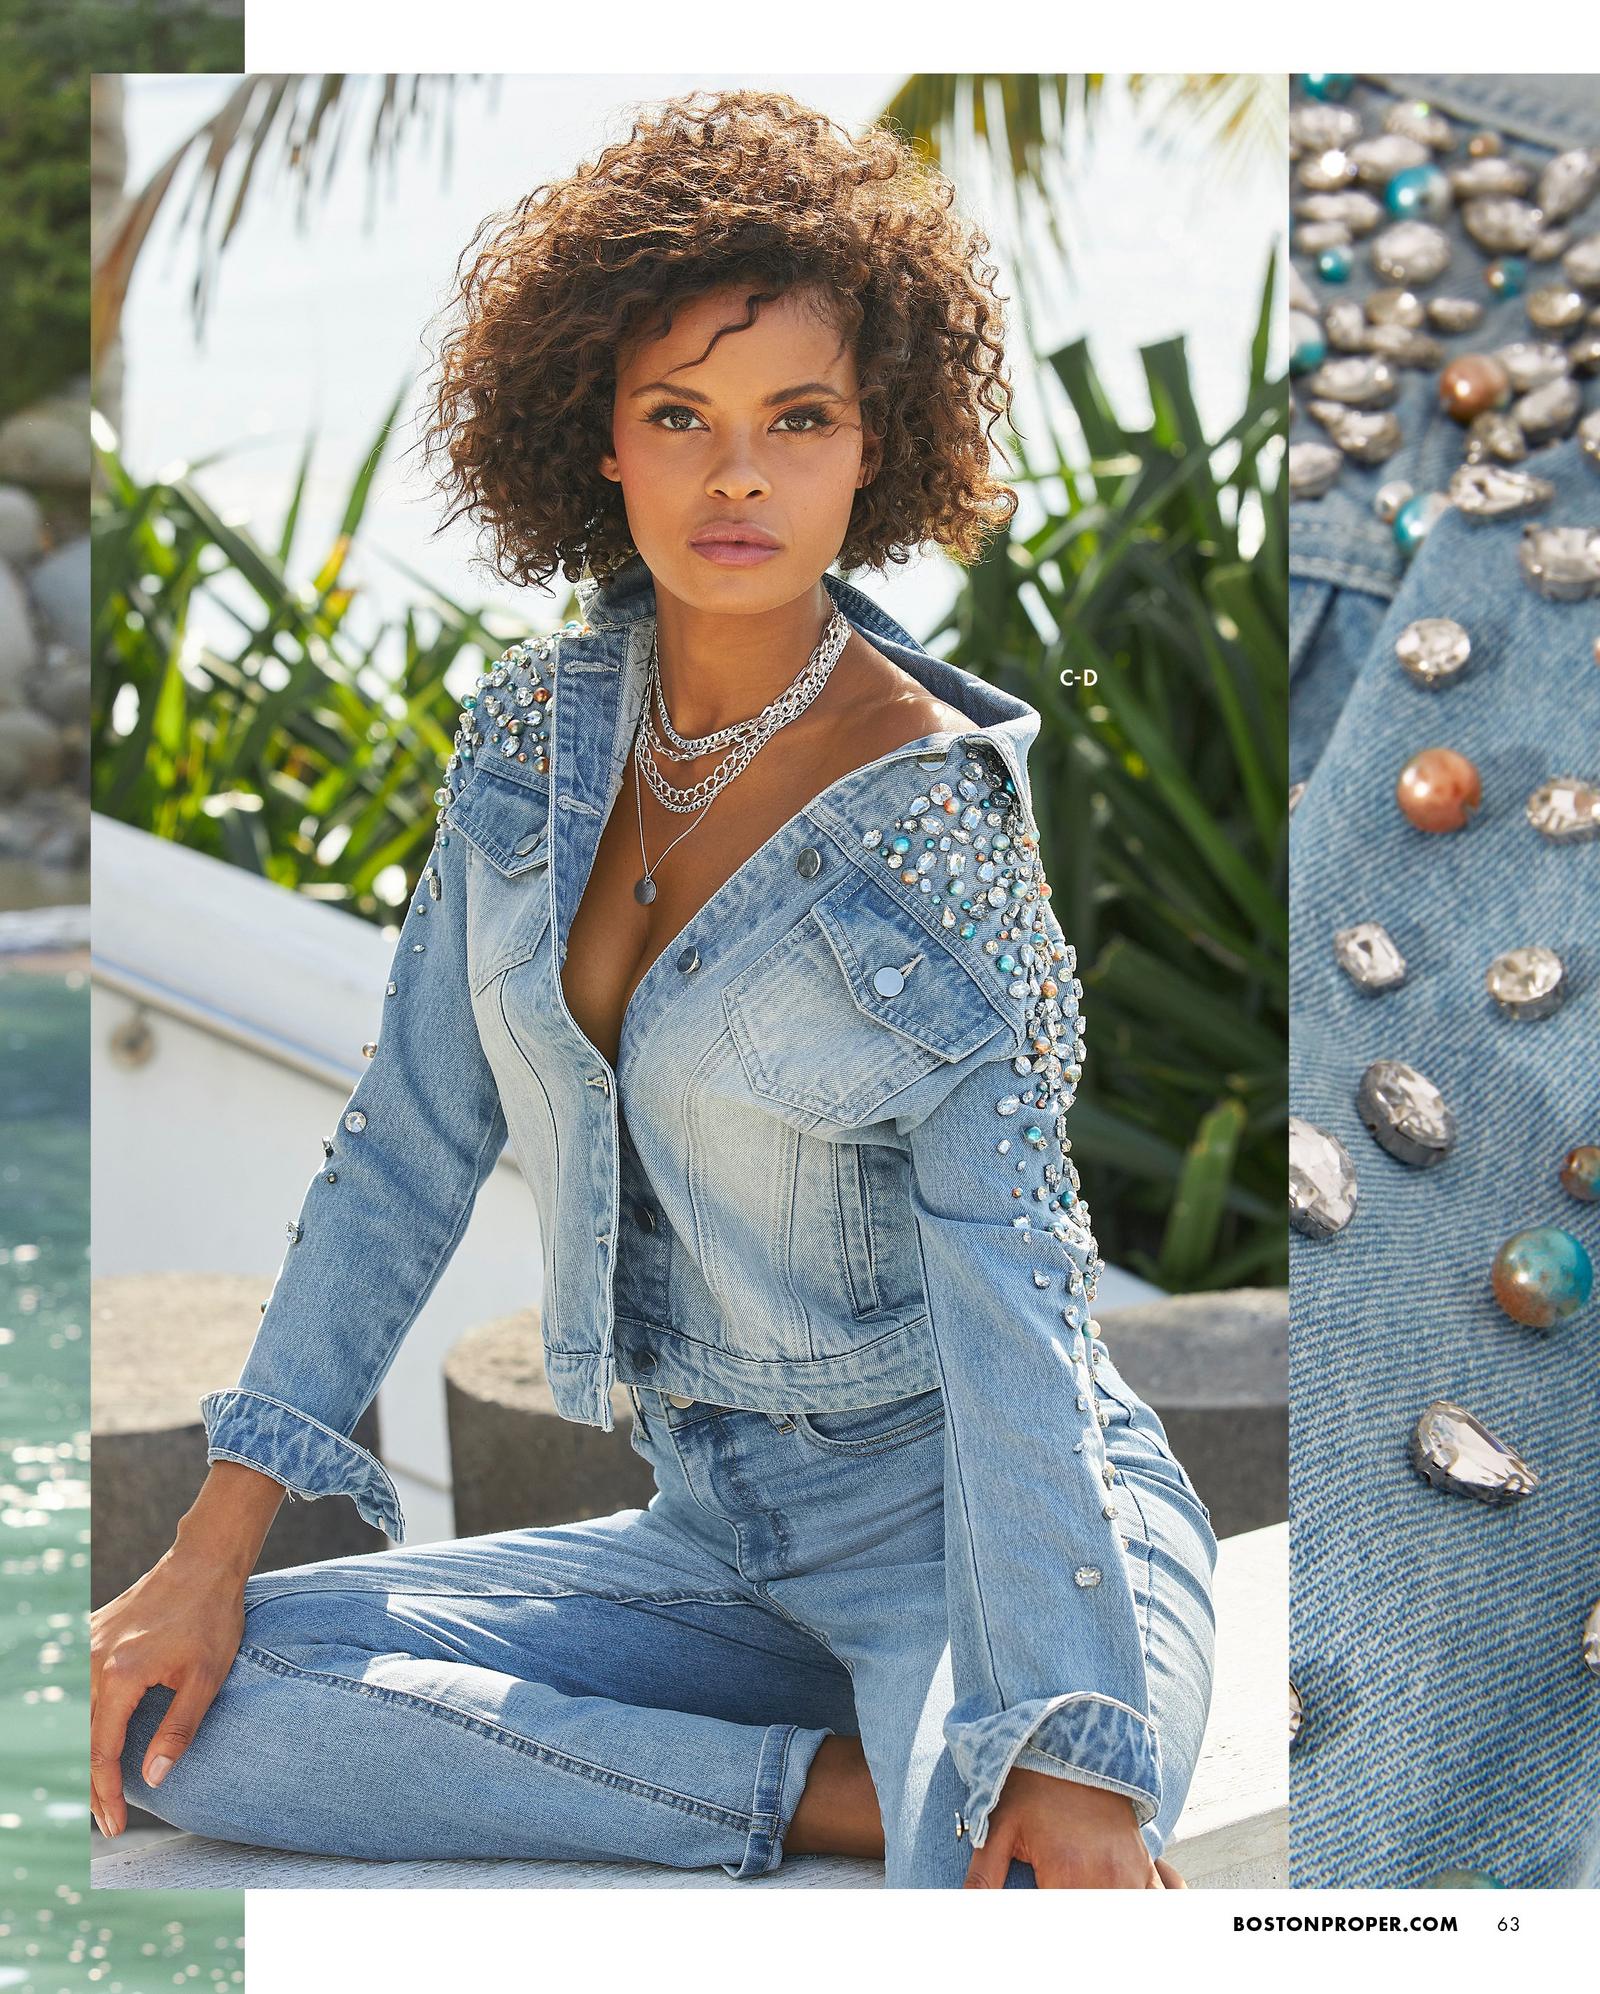 model wearing a pearl and jewel embellished denim jacket and light wash jeans.